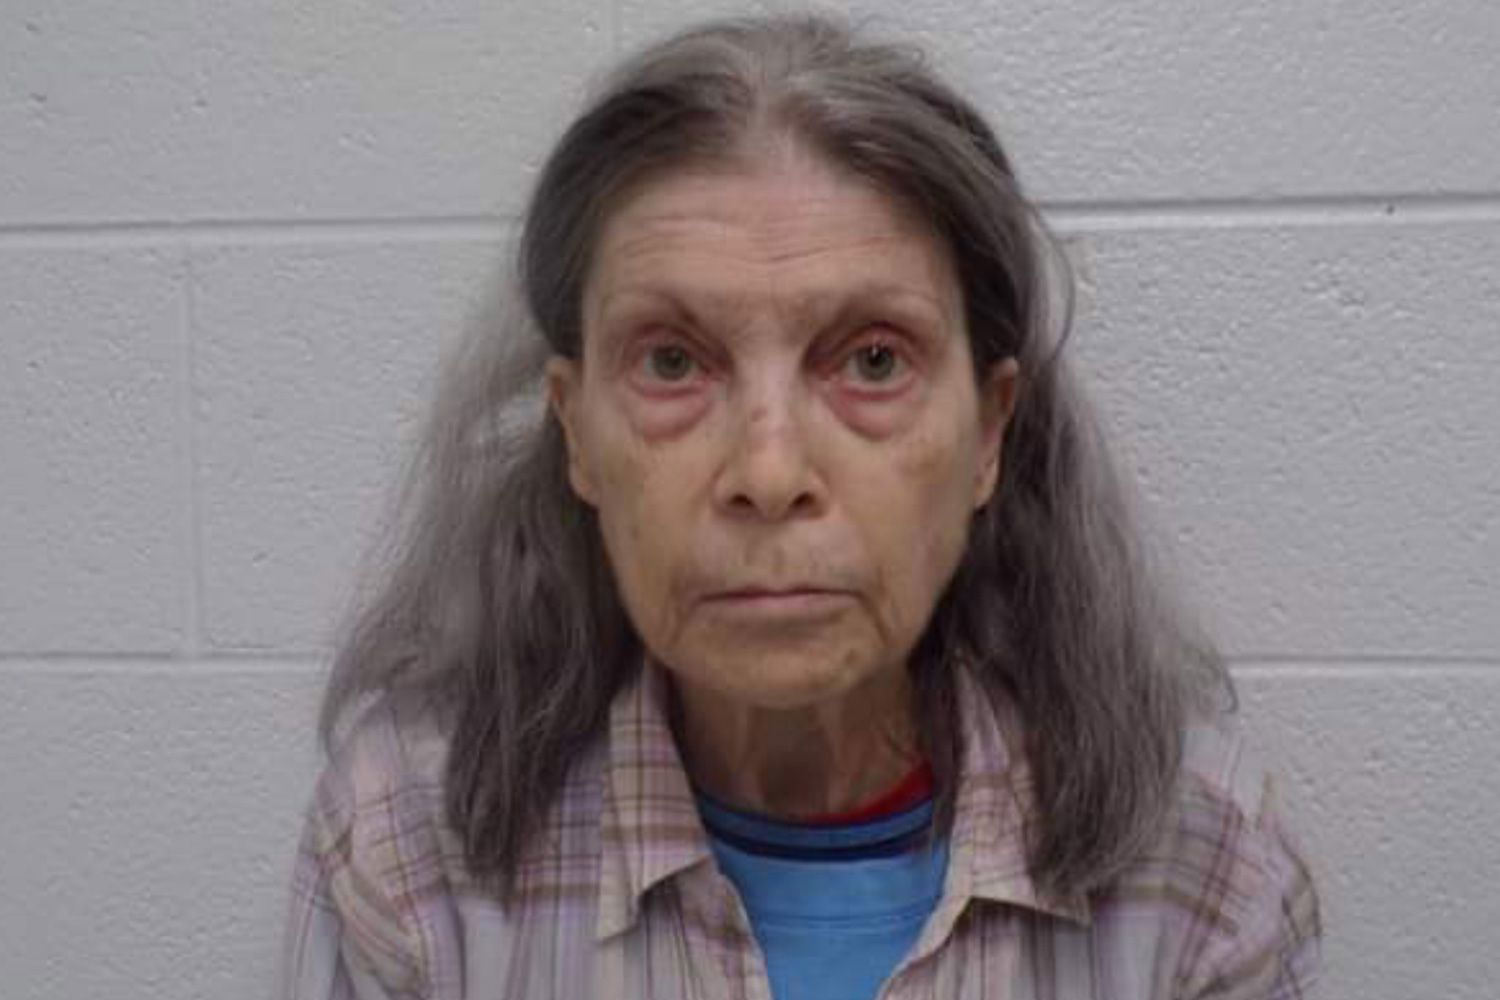 Jury Trial Set For 76 Year Old Maryland Woman Accused Of Killing Husband With Cane